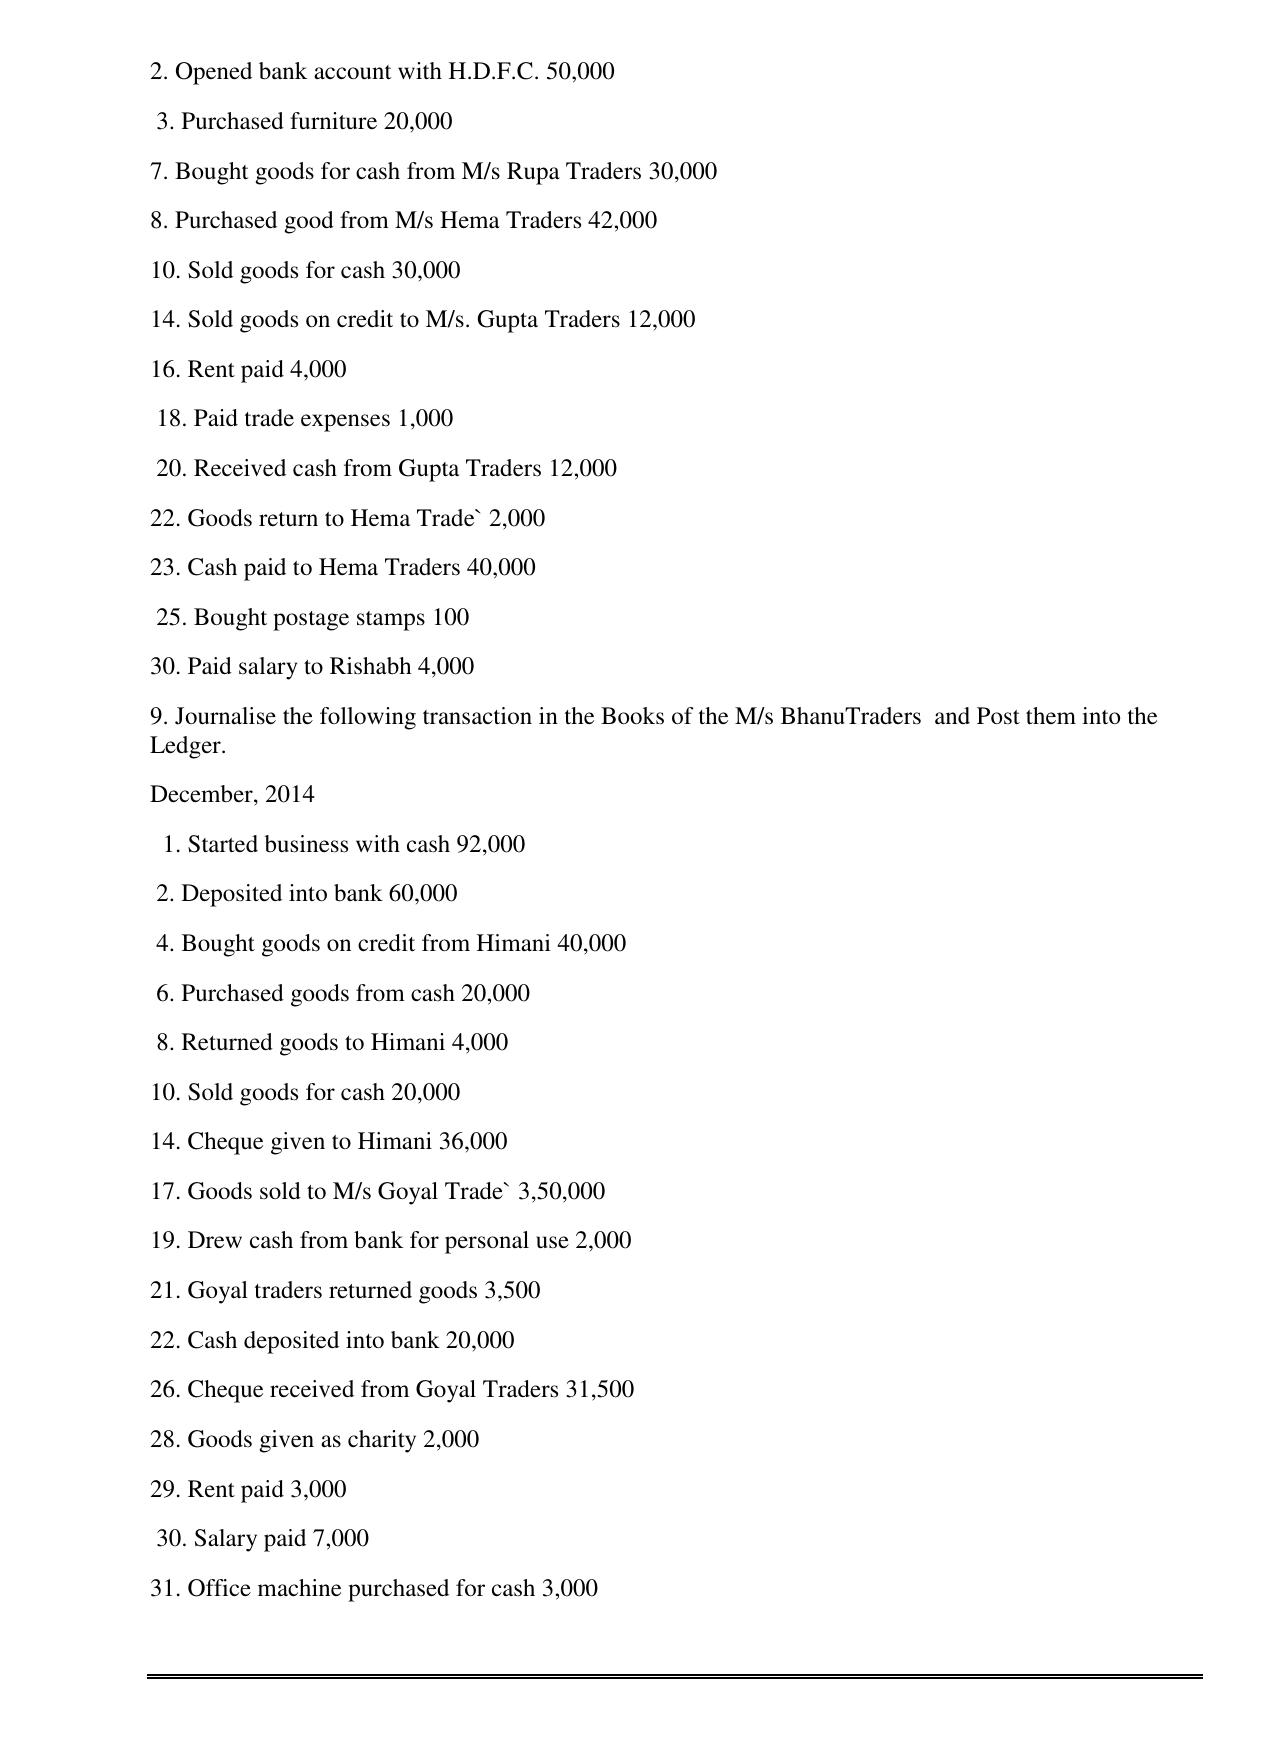 CBSE Worksheets for Class 11 Accountancy Journal and Ledger Assignment - Page 4